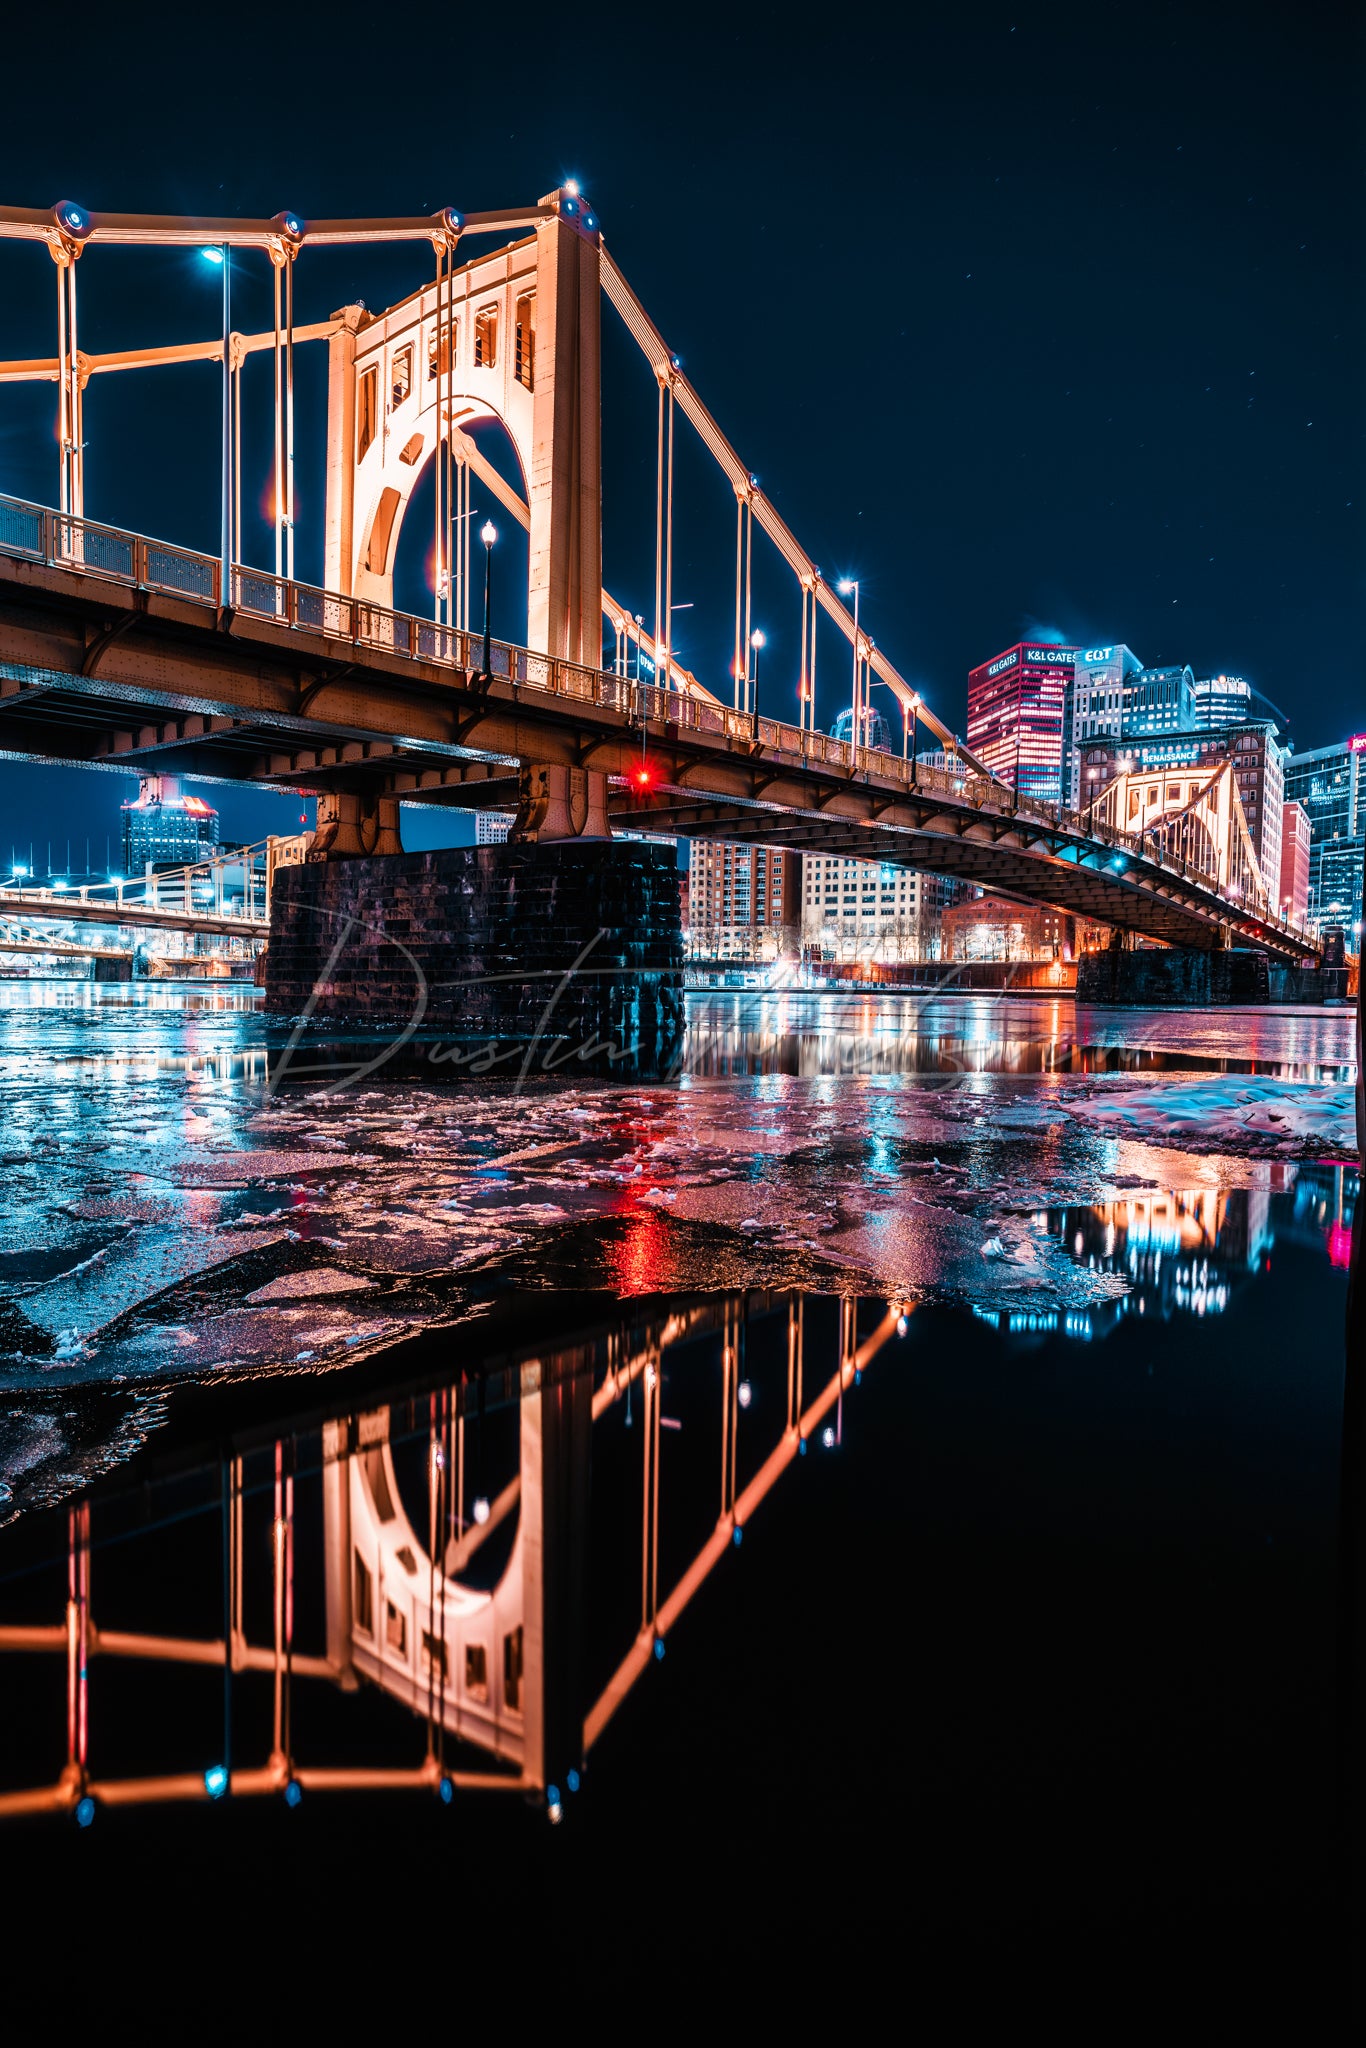 Clemente Bridge Reflecting in the Cold Allegheny River